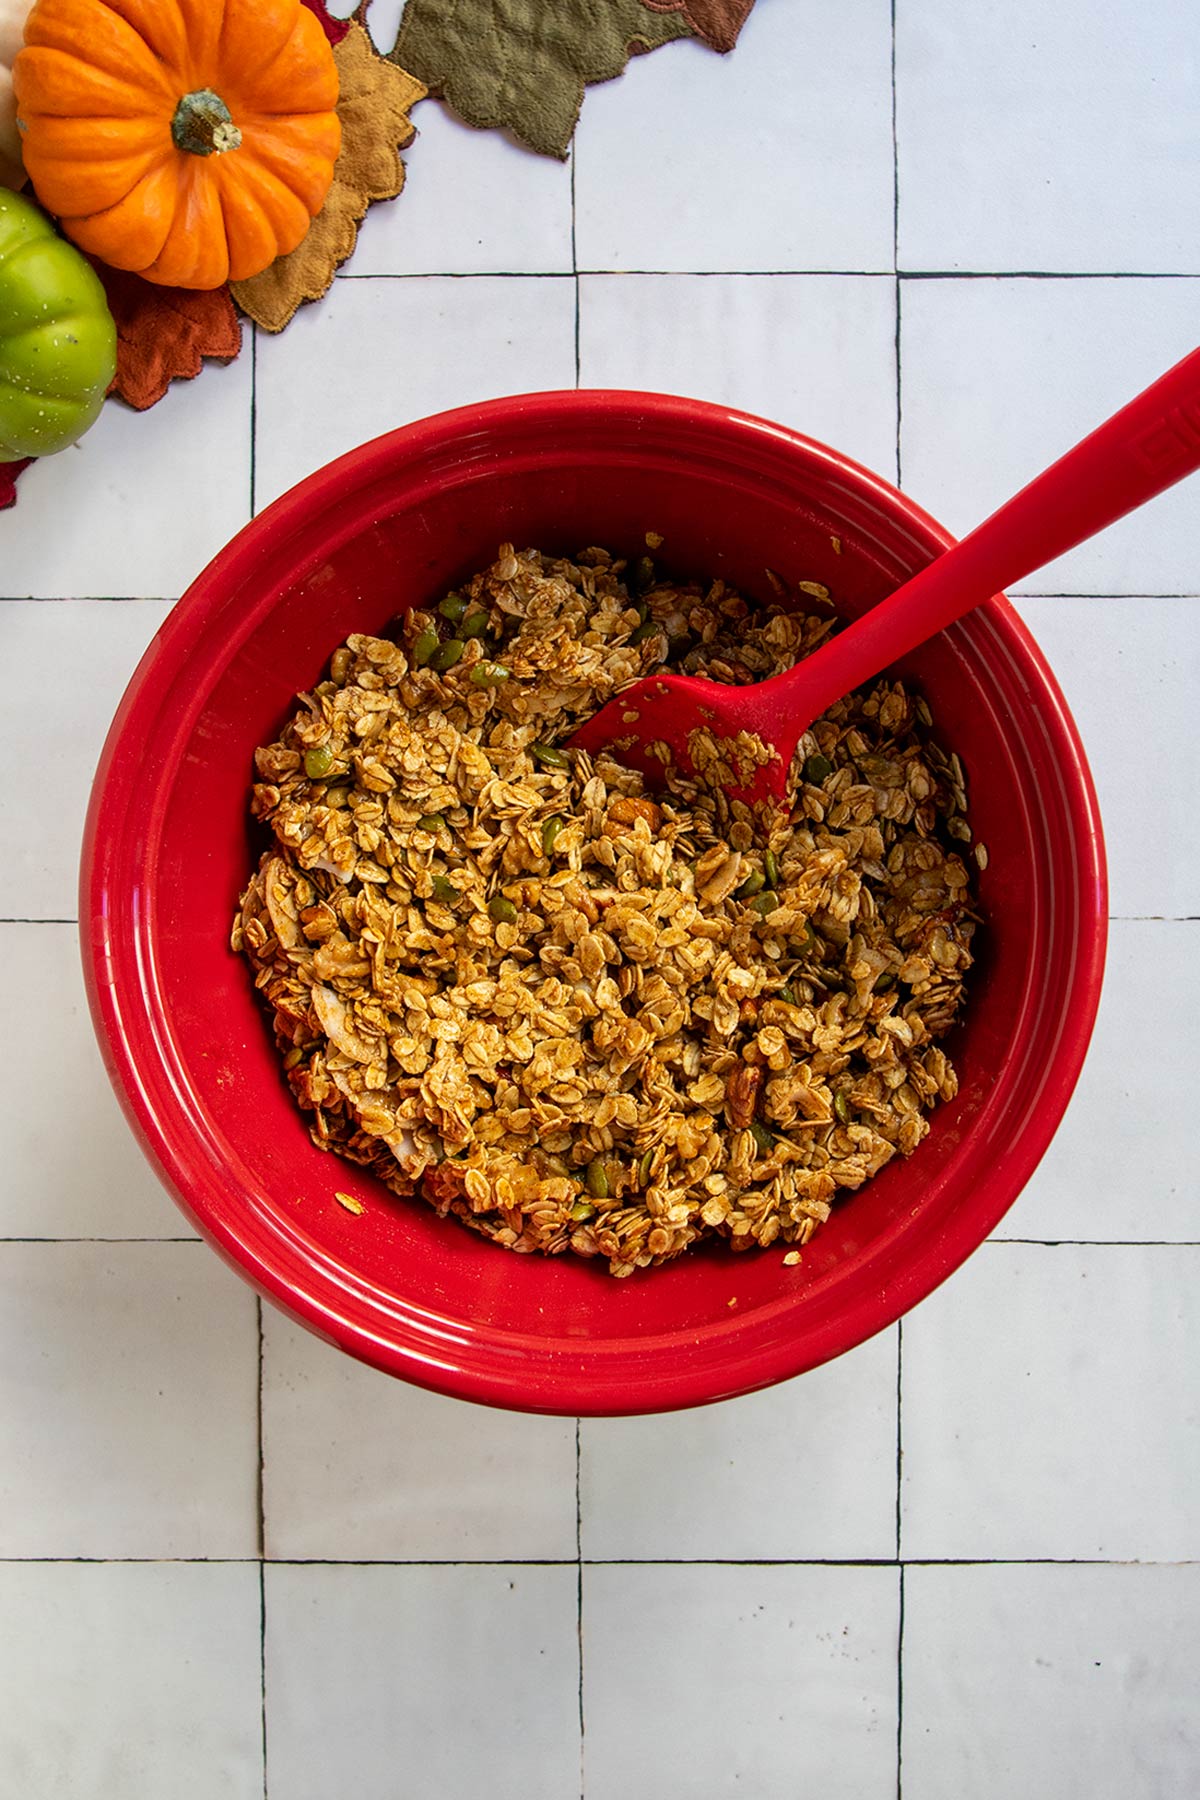 Wet and dry pumpkin granola ingredients mixed together in red bowl with red rubber spatula.